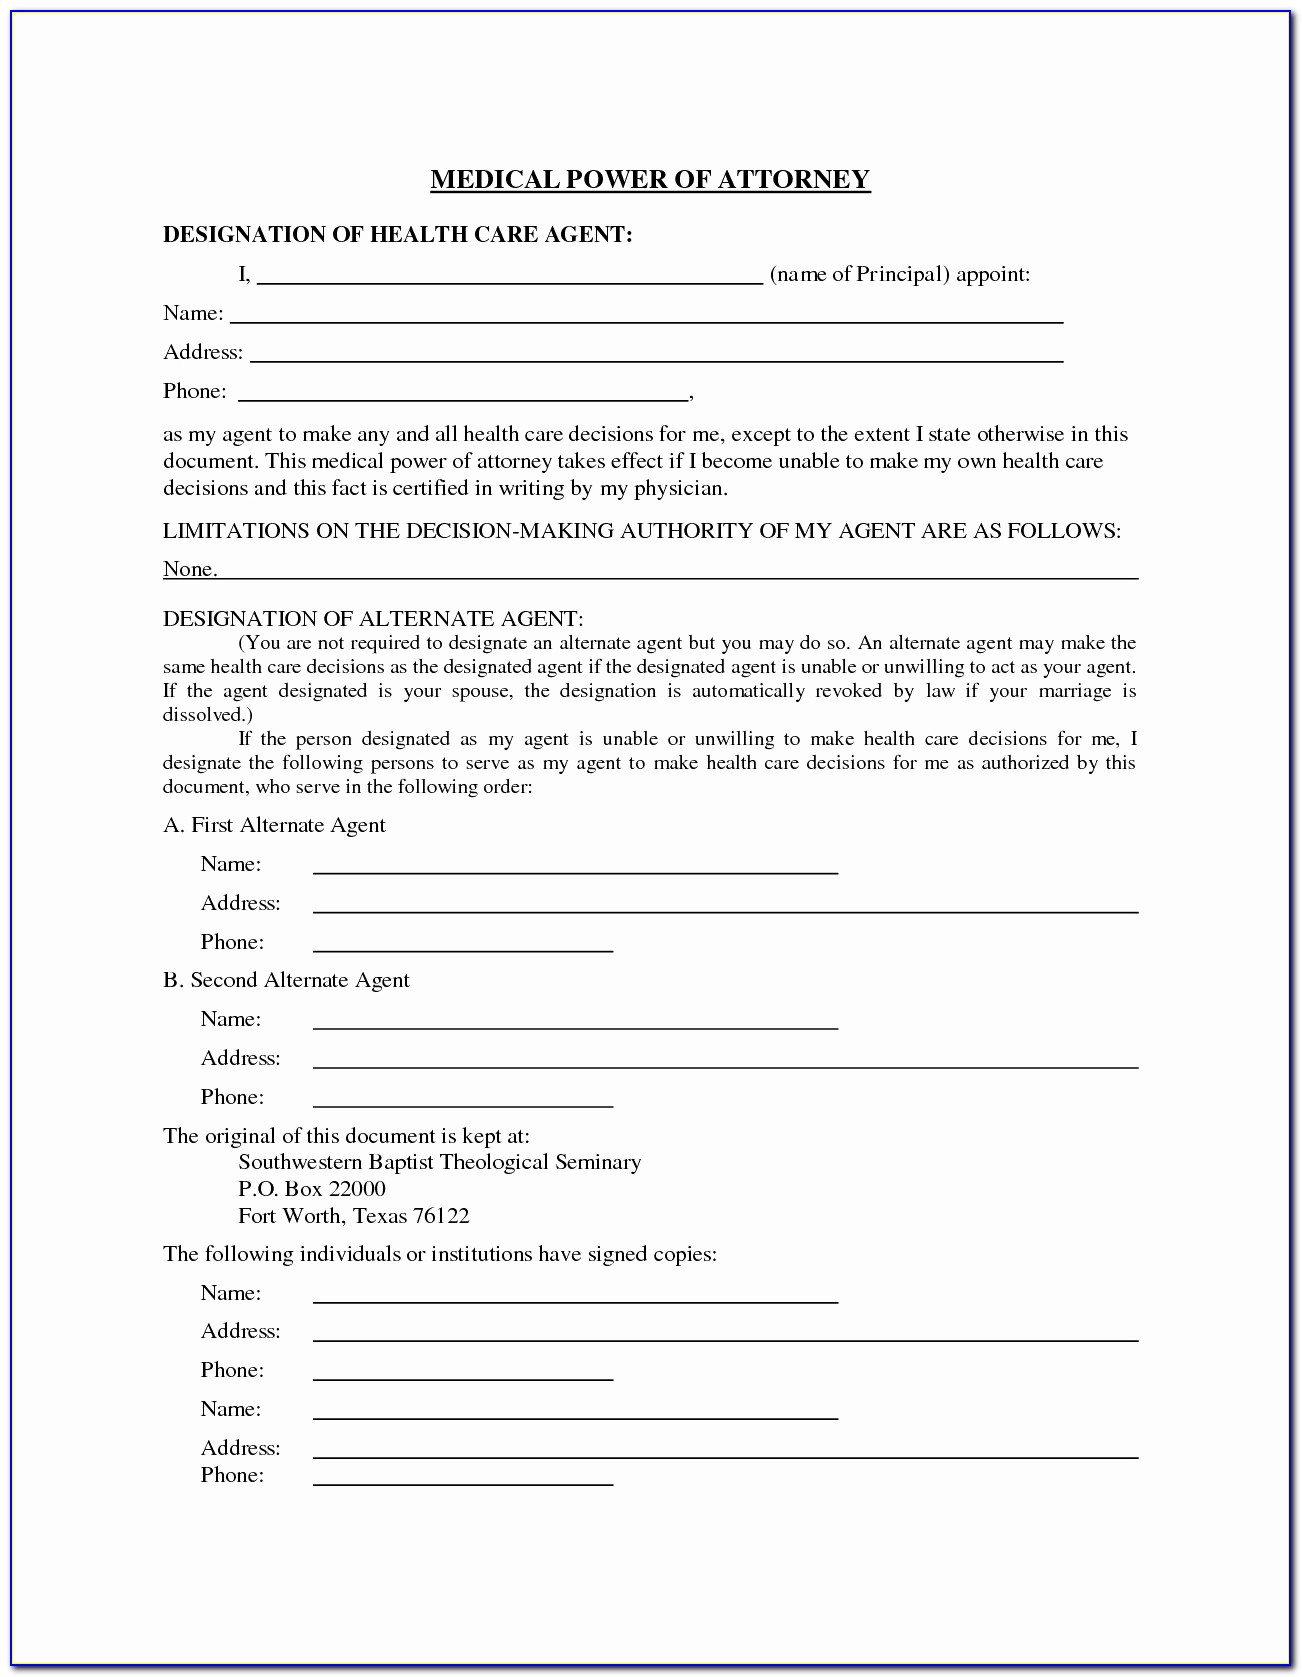 General Power Of Attorney Form Oklahoma Lovely 50 Awesome General Power Attorney Form Oklahoma Documents Ideas